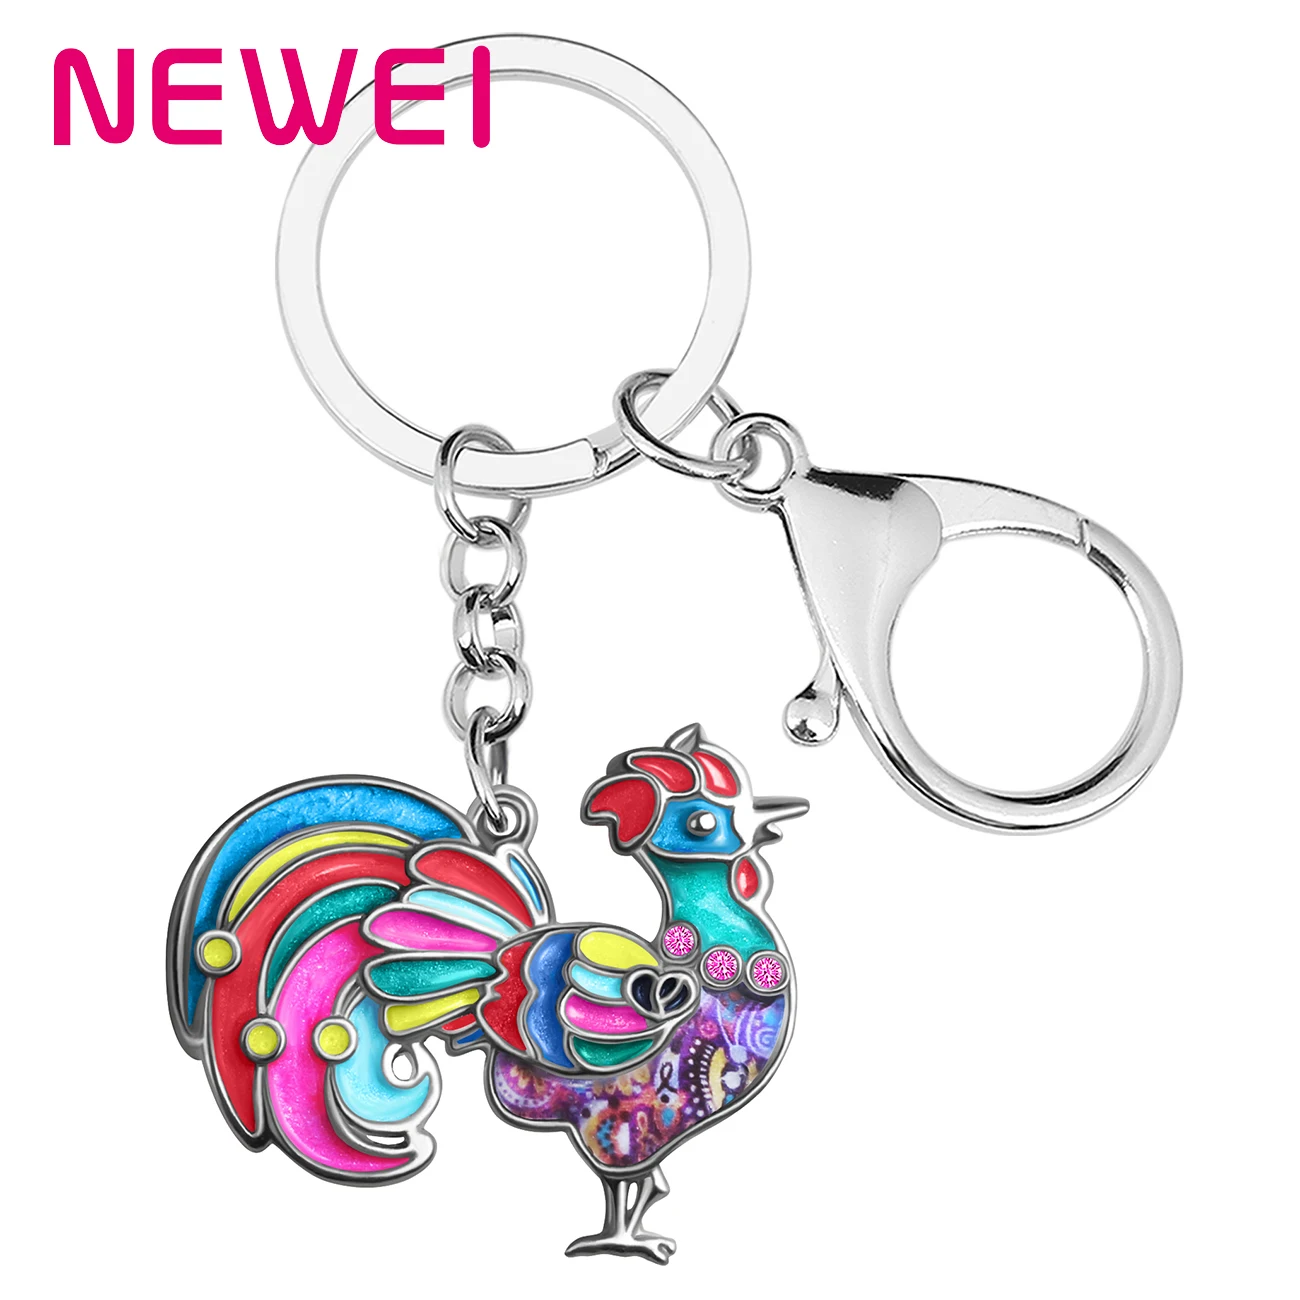 

NEWEI Enamel Alloy Floral Chicken Rooster Keychains Car Purse Key Chain Ring Gifts Fashion Jewelry For Women Girls Bag Charms